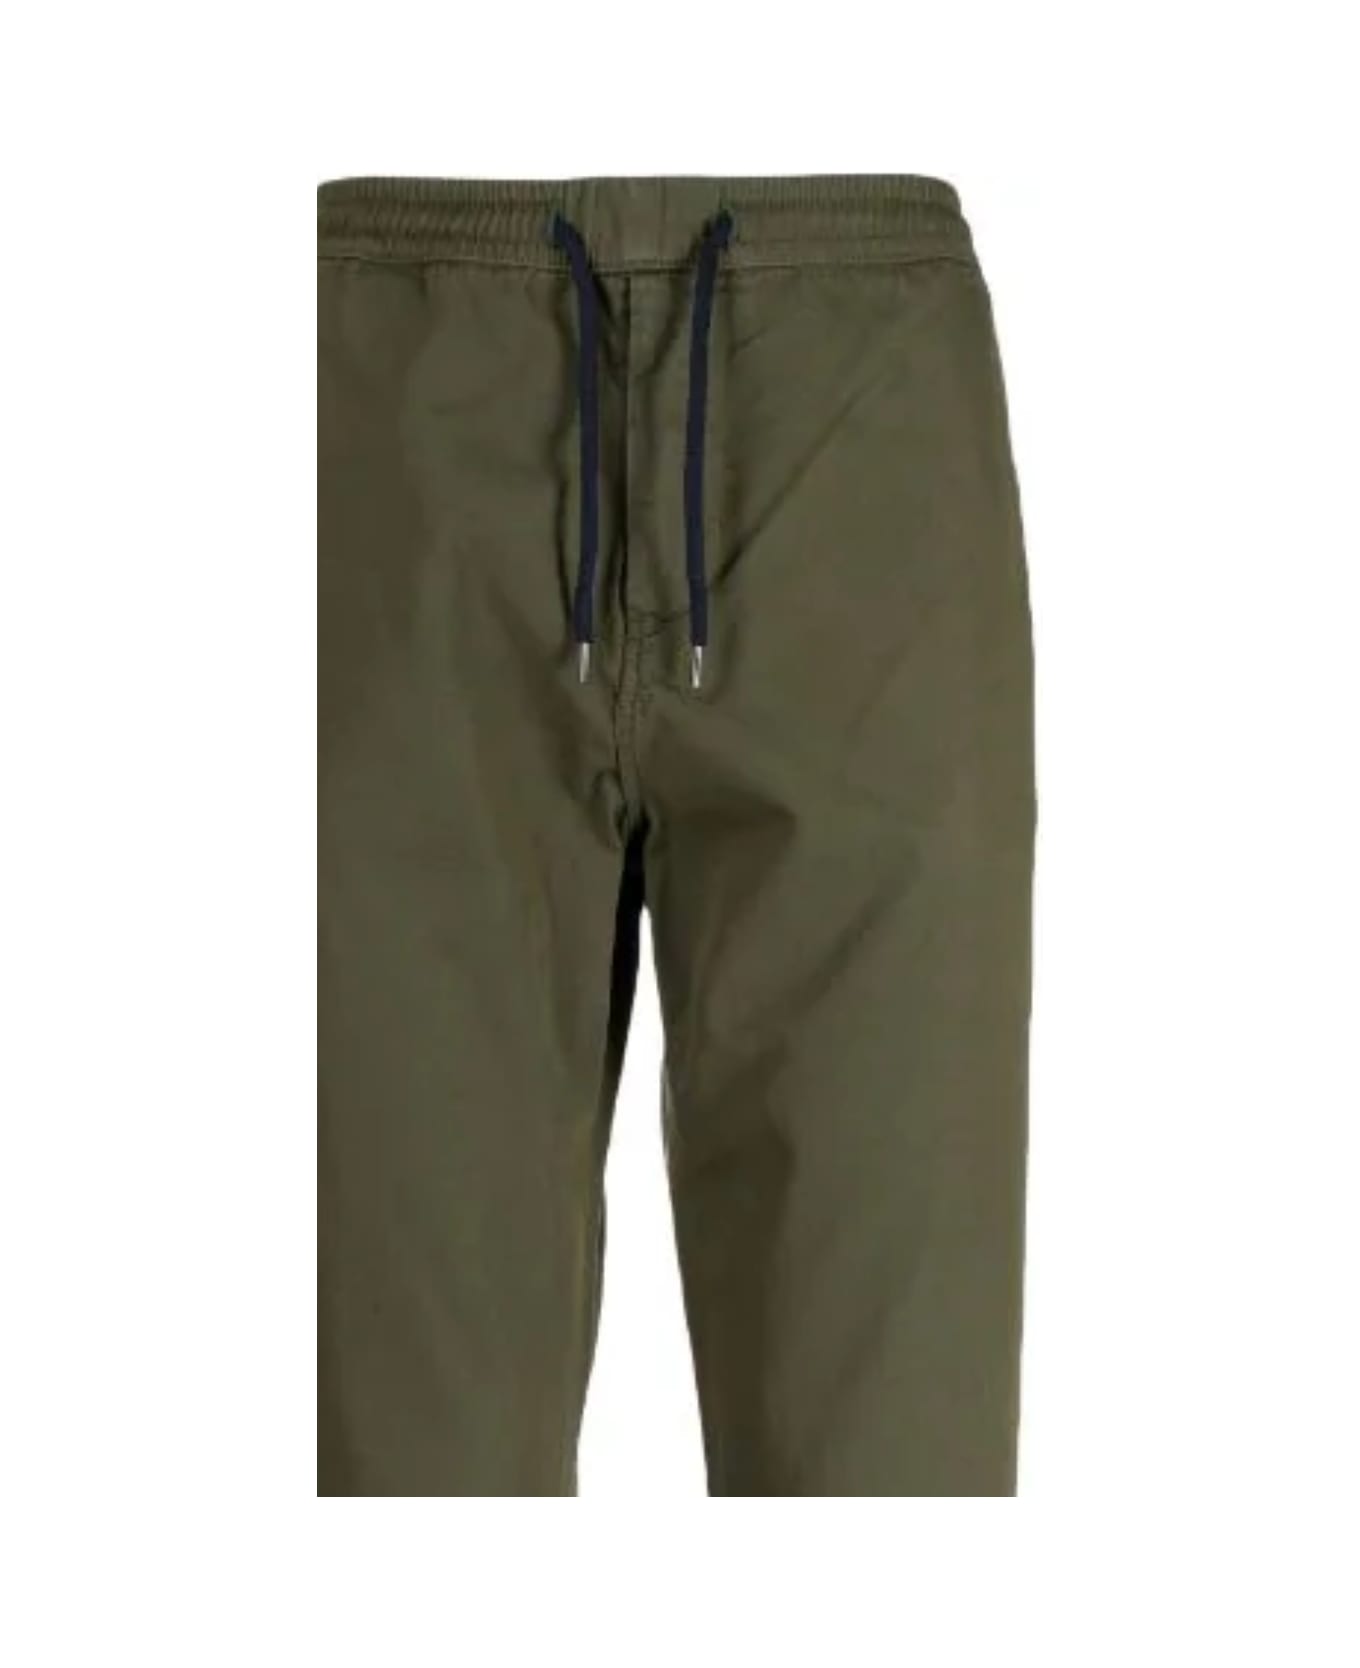 PS by Paul Smith Mens Drawstring Trouser - Greens